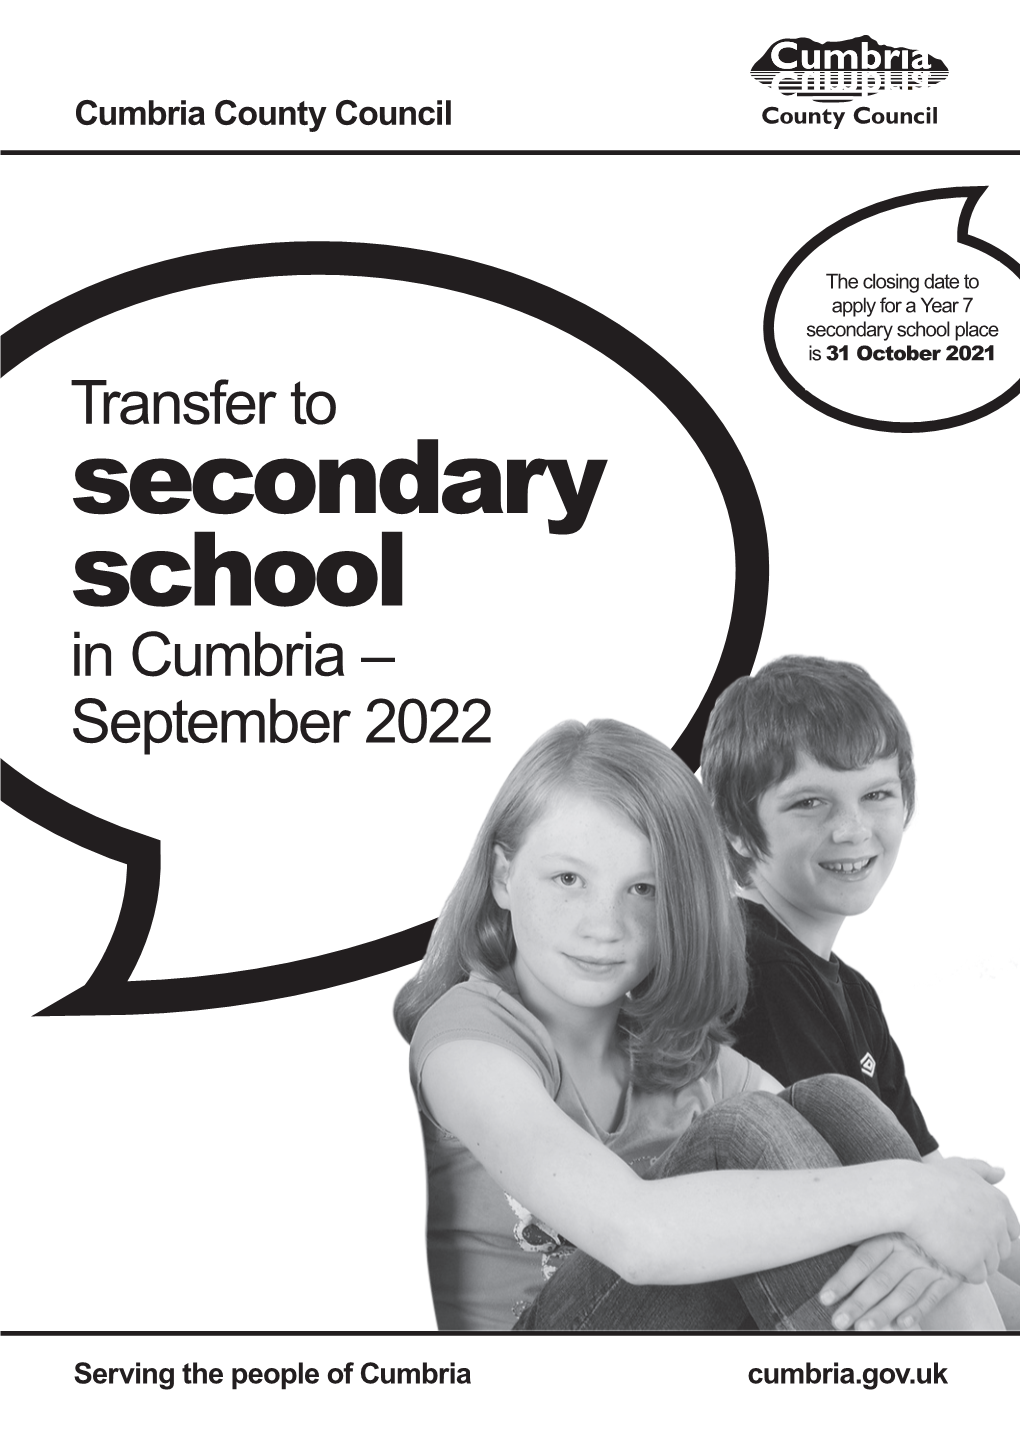 Transfer to Secondary School in Cumbria – September 2022